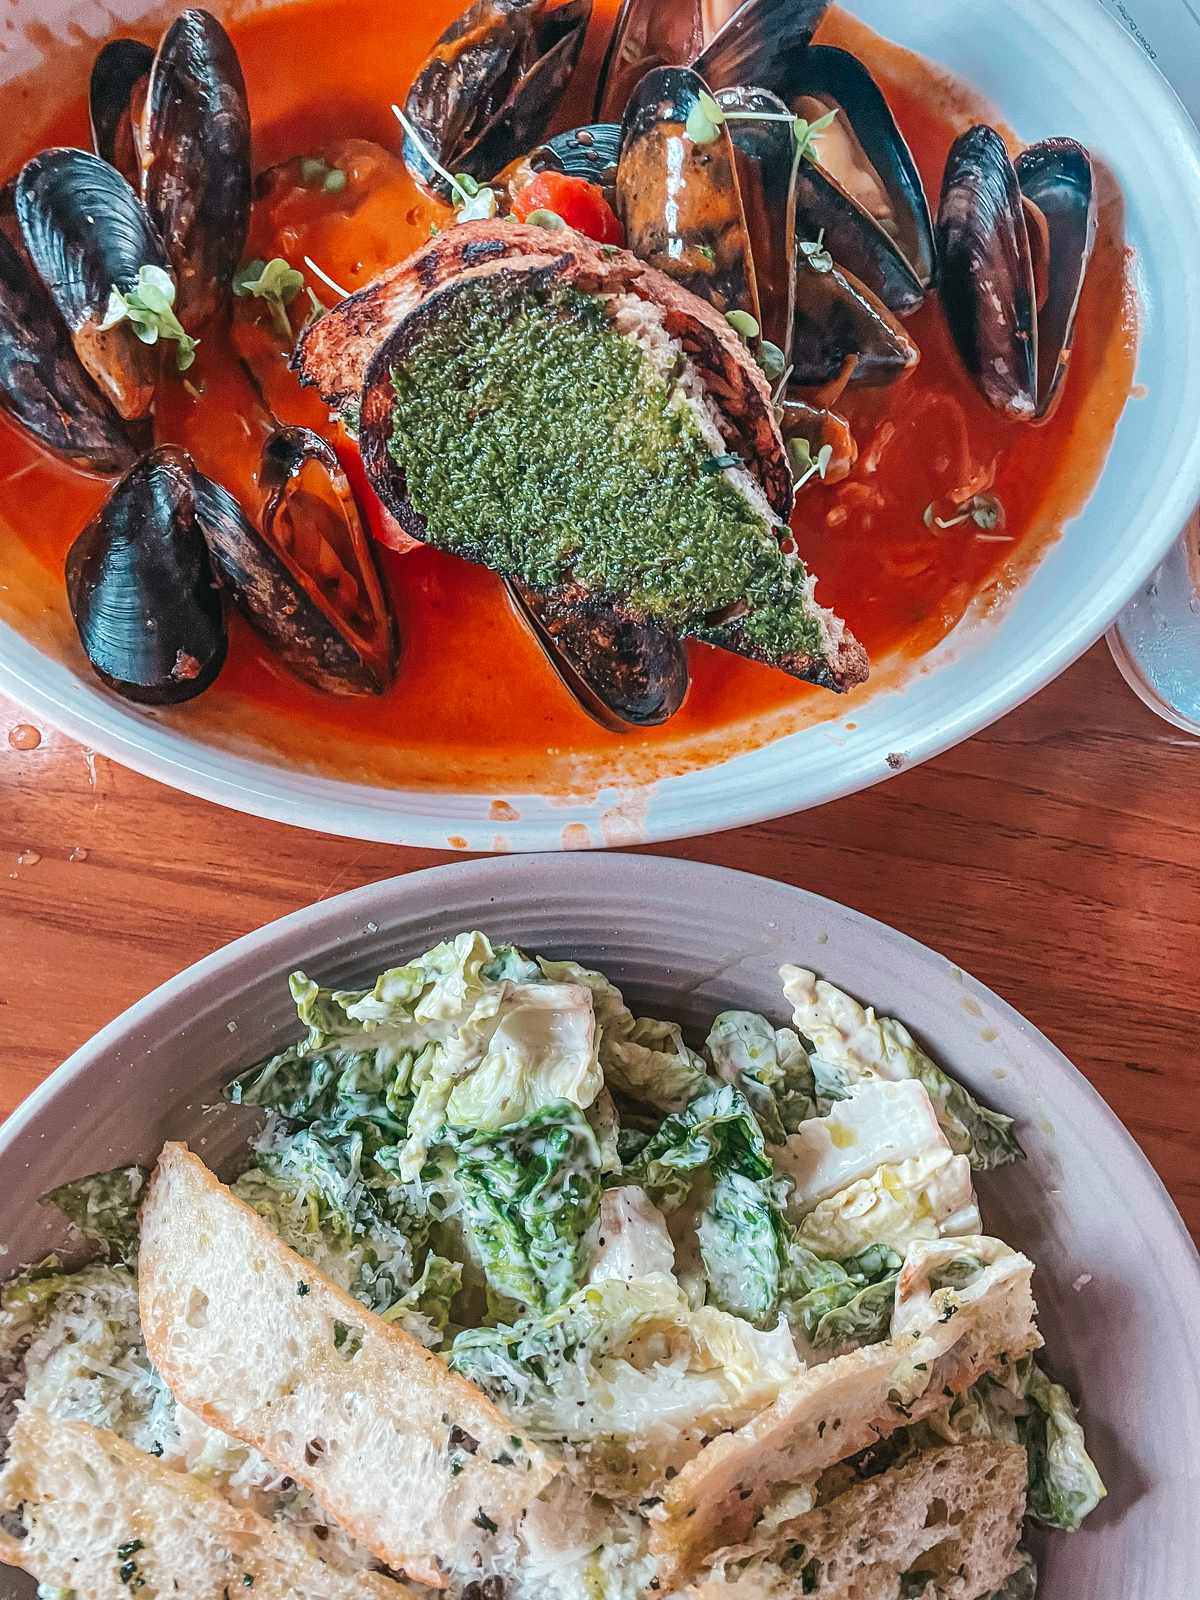 Mussels and Ceasar salad from Fat Ox in Scottsdale